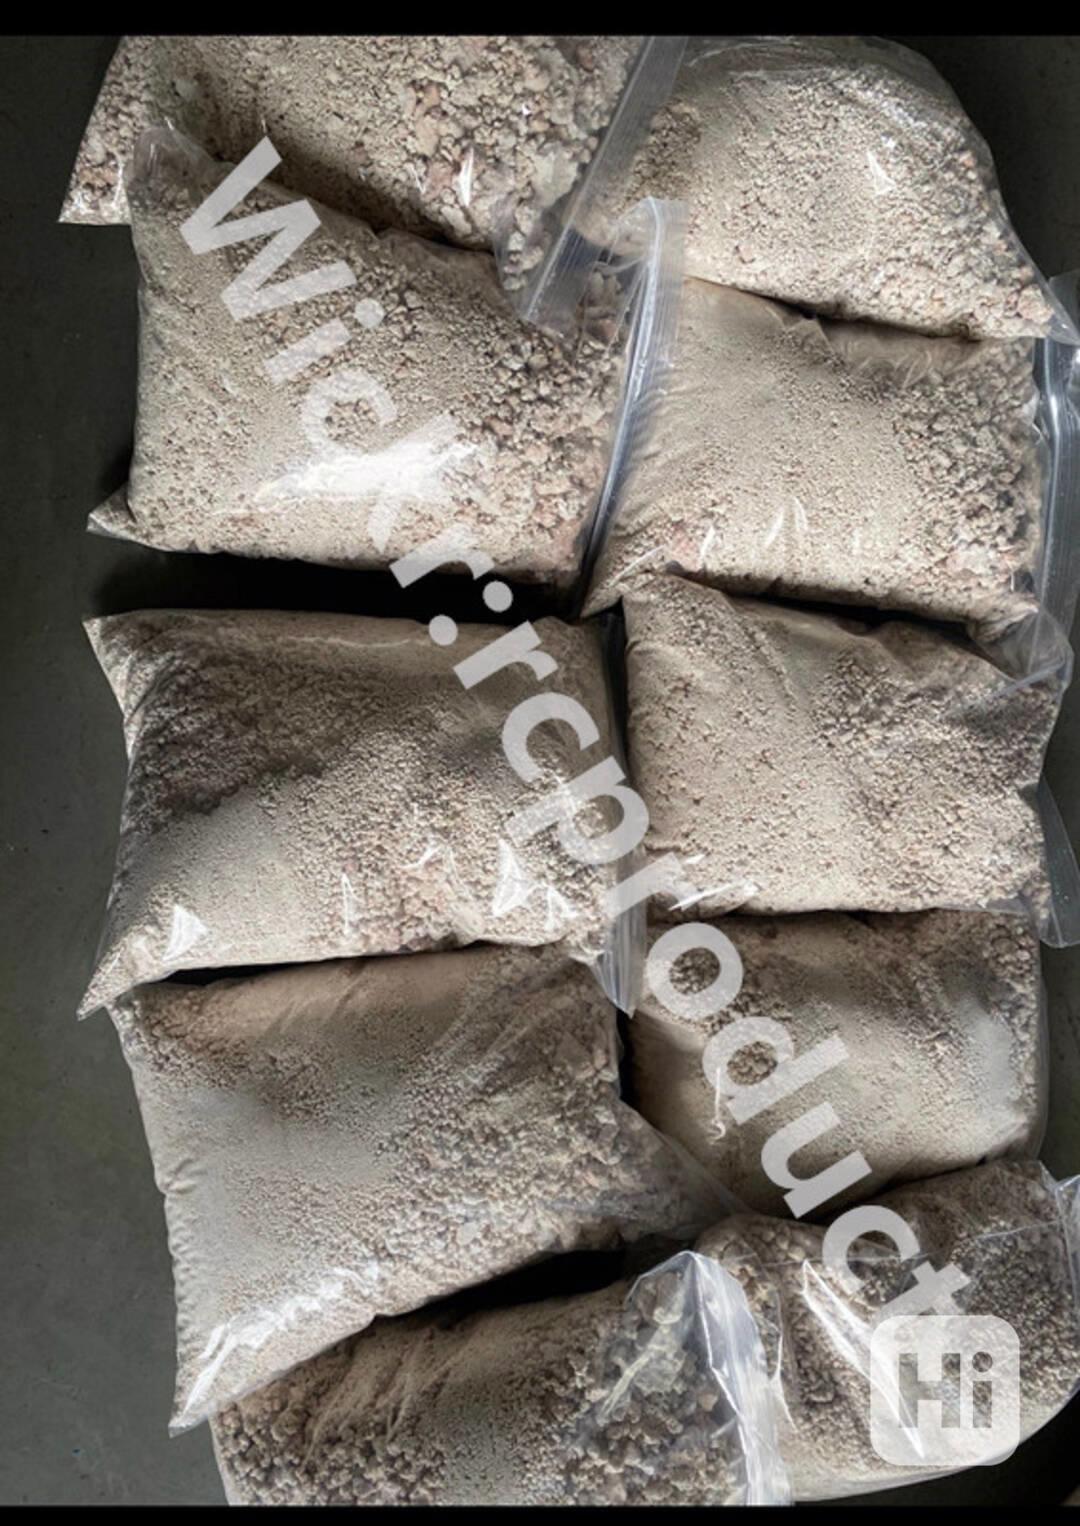 Researchchemical 8fa powder,potent effect,wickr:rcprduct - foto 1